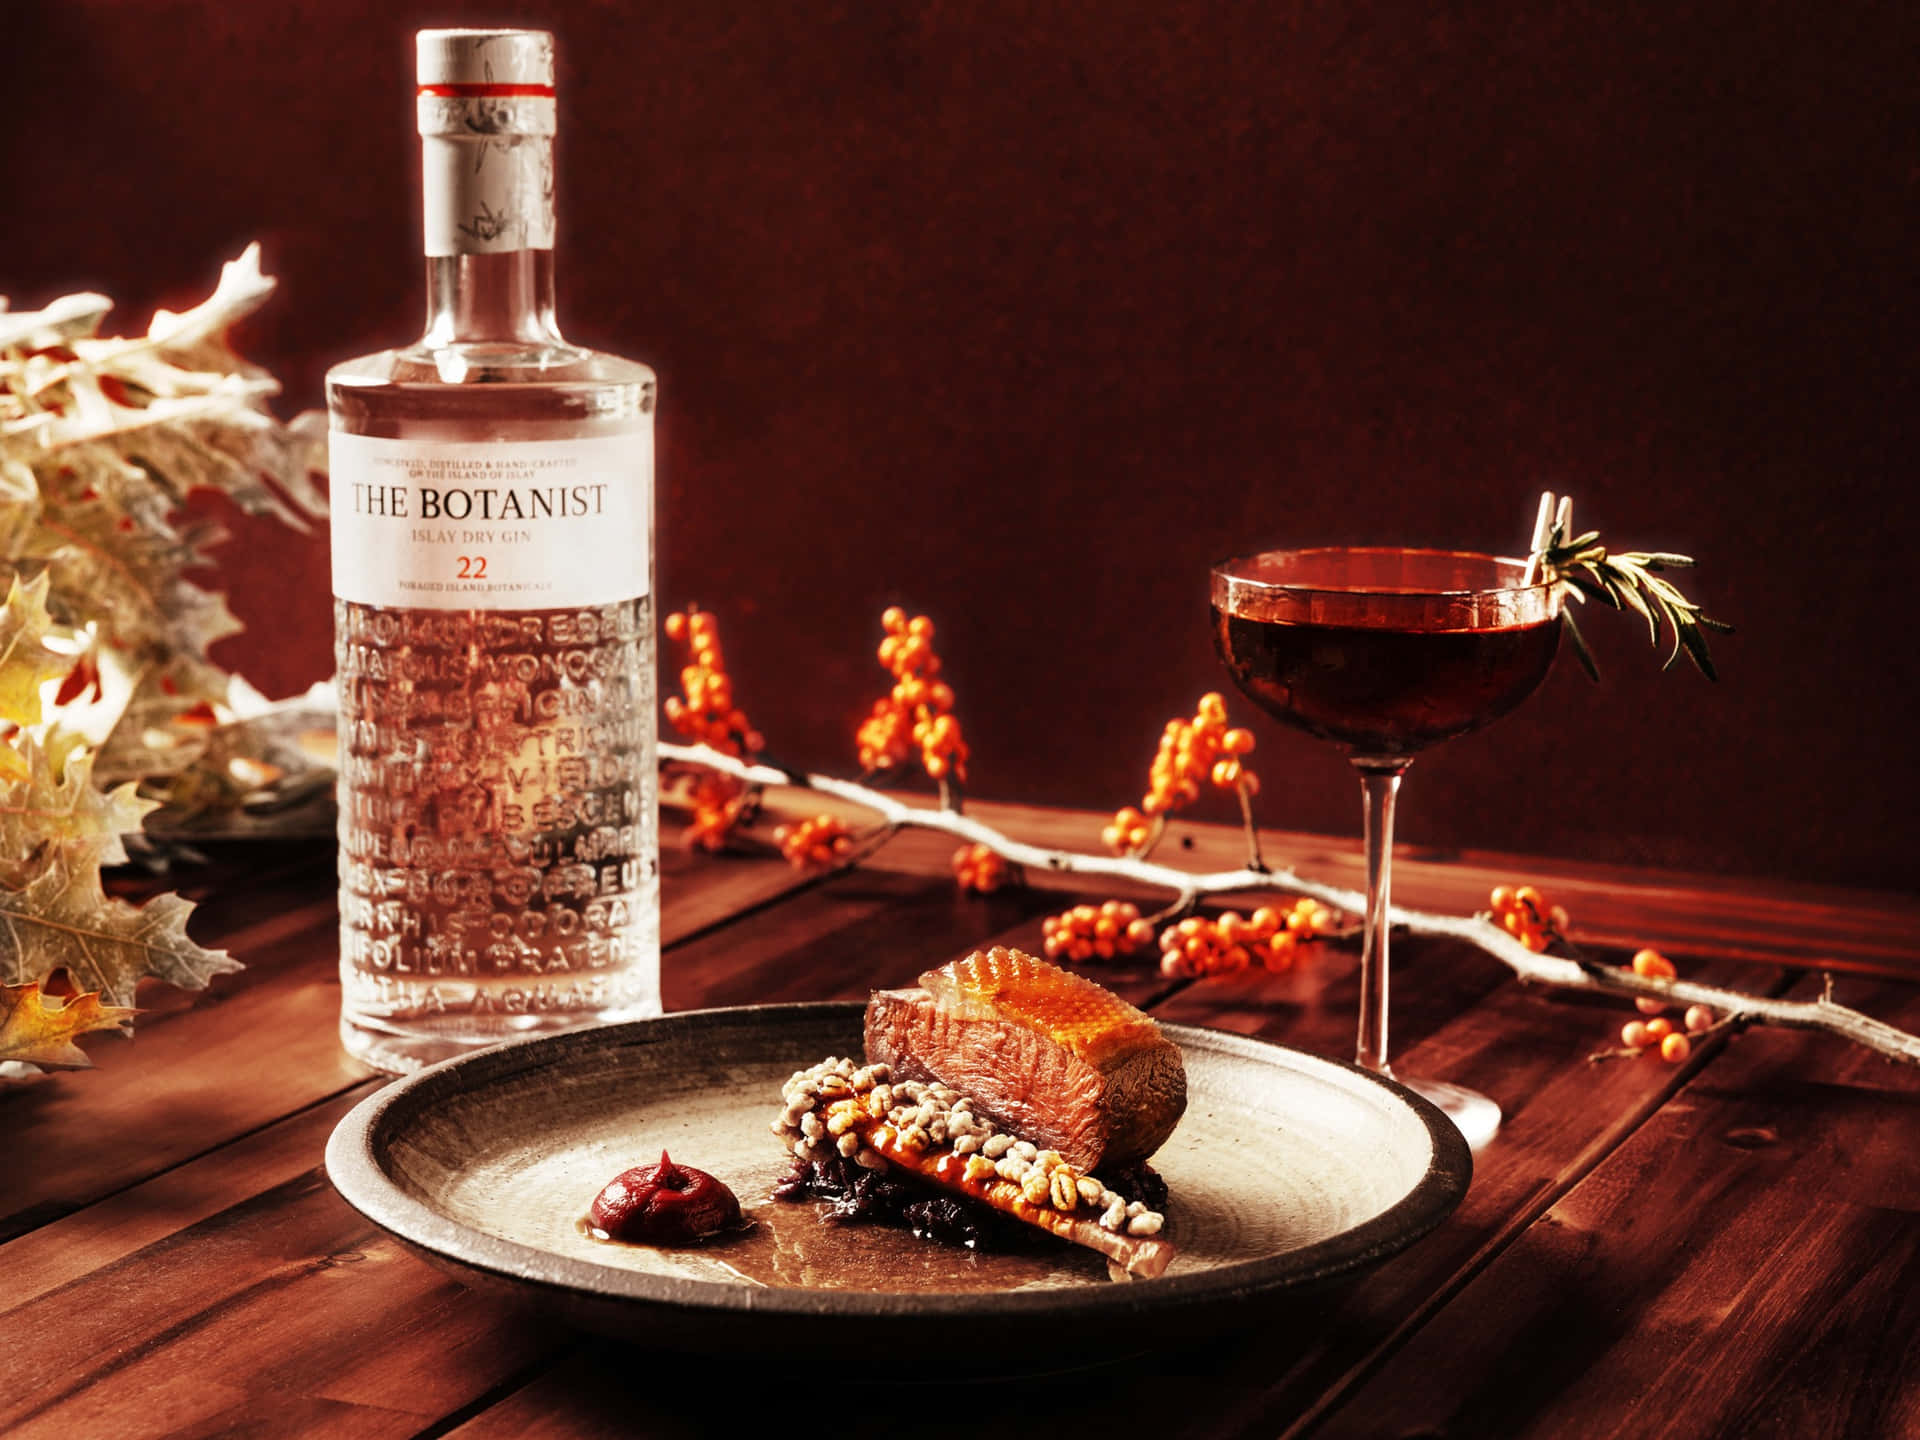 The Botanist Islay Dry Gin Alcoholic Drink And Dinner Meal Wallpaper